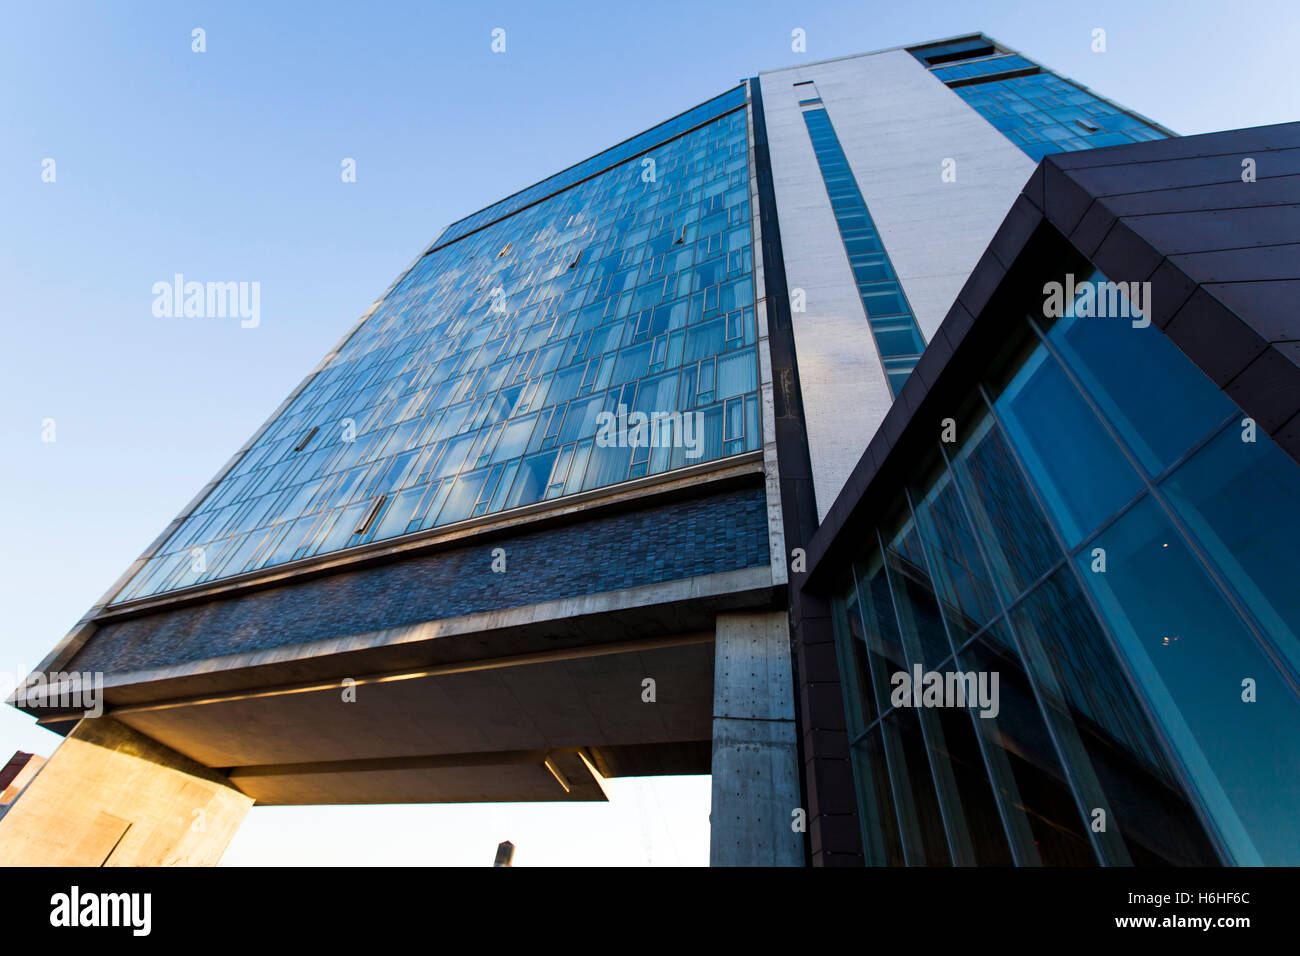 NEW-YORK - NOV 17: Low angle view of a modern building rising above the Highline Park in New-York, USA on November 17, 2012. Stock Photo